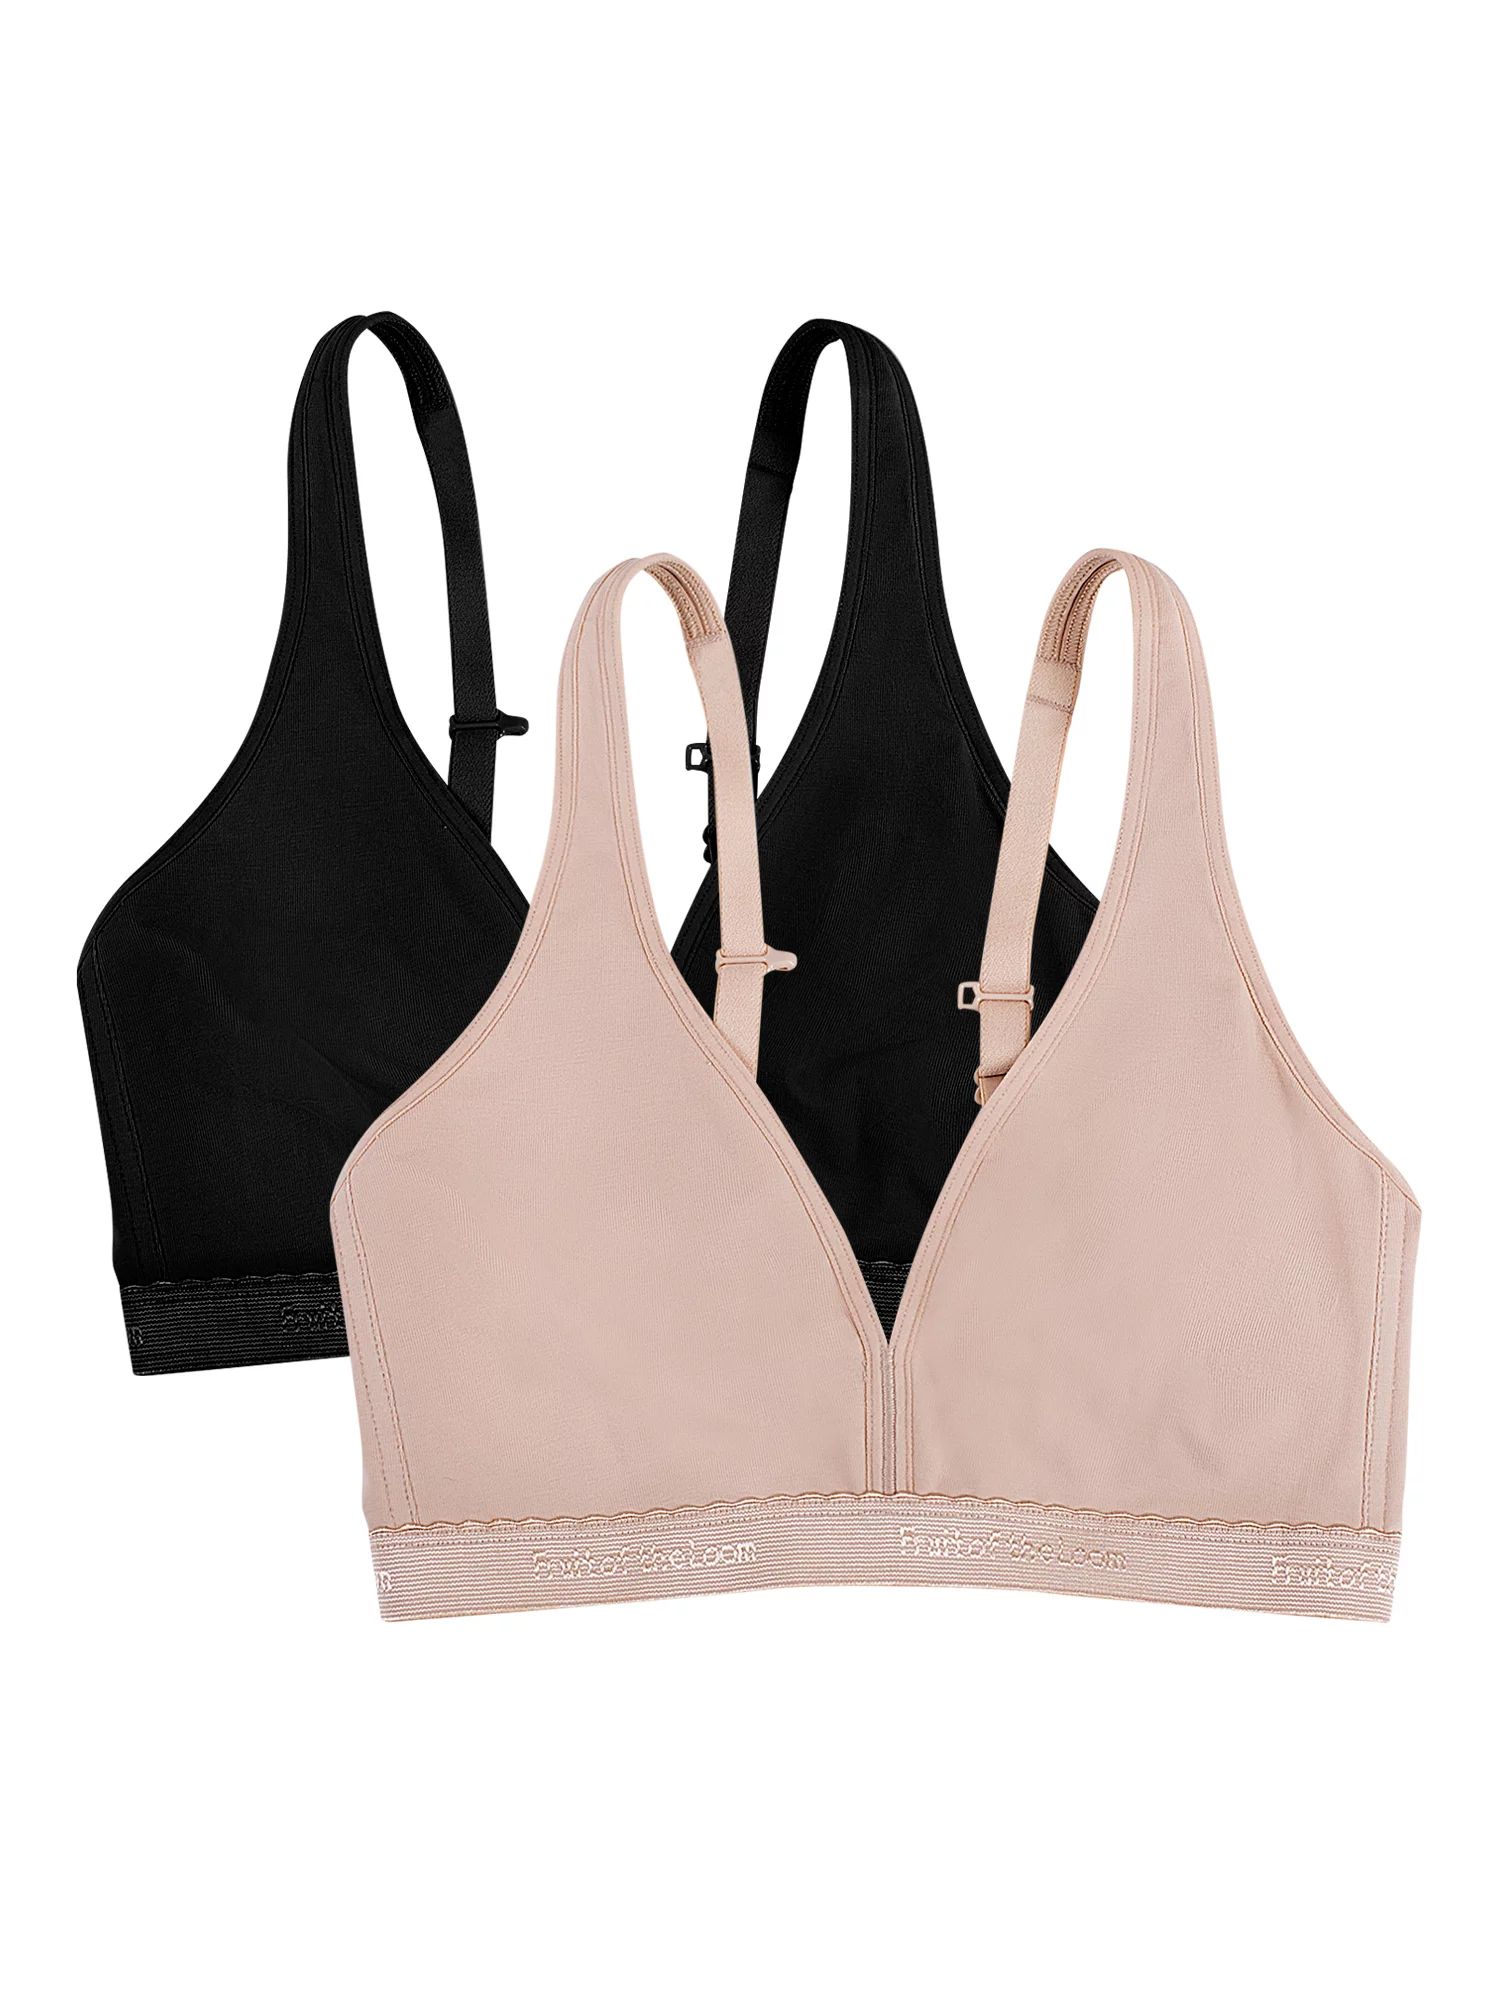 Fruit of the Loom Women's Wirefree Cotton Bralette, 2-pack, Style-FT799PK | Walmart (US)